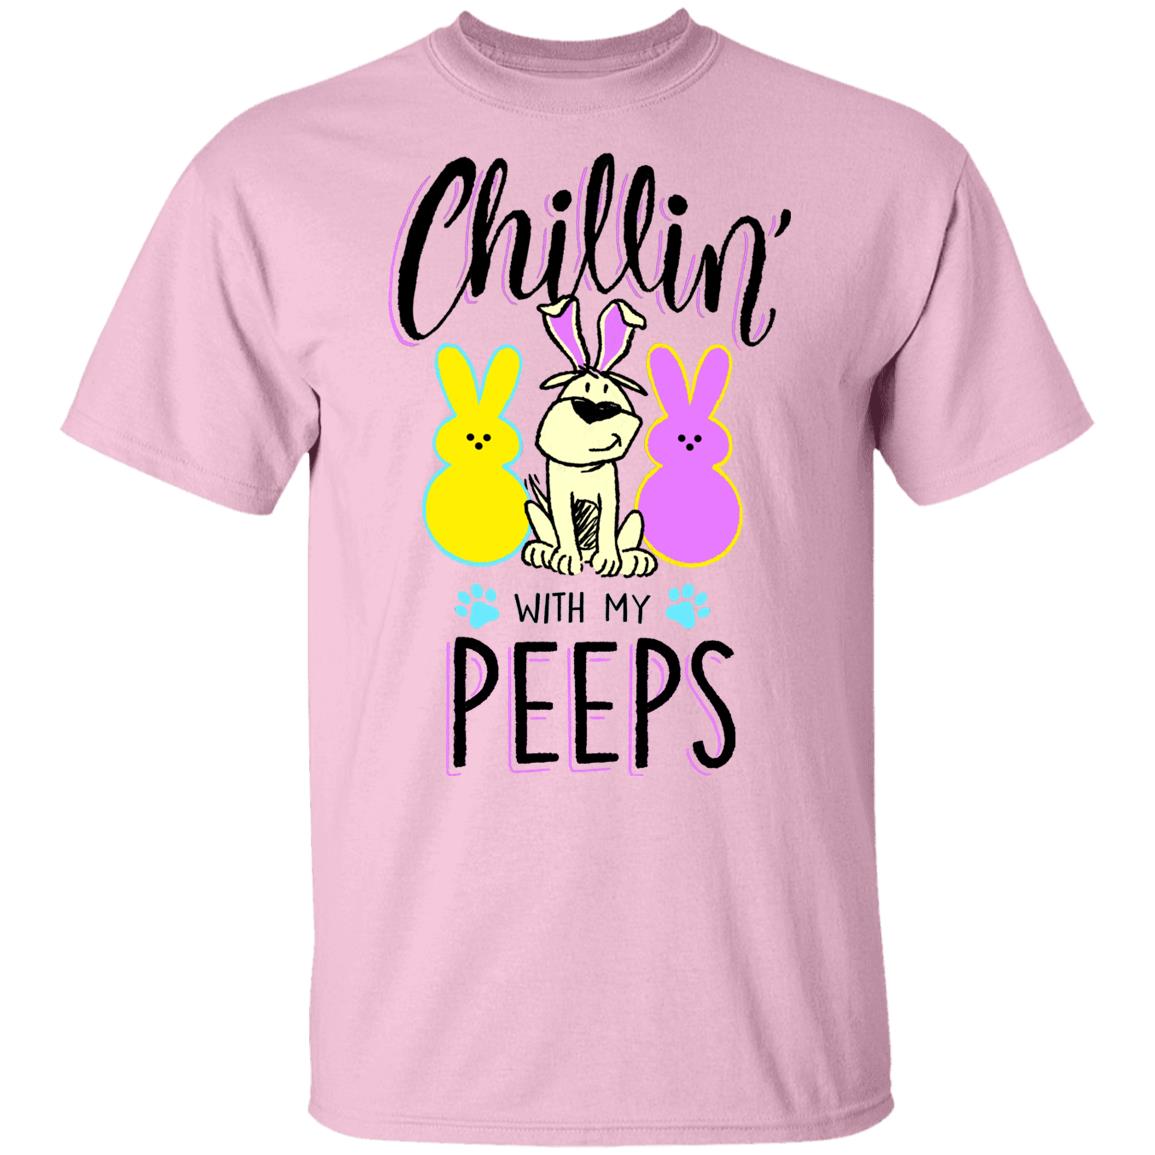 Chilln' With My Peeps-  🐰 Kids Tee (Pink)